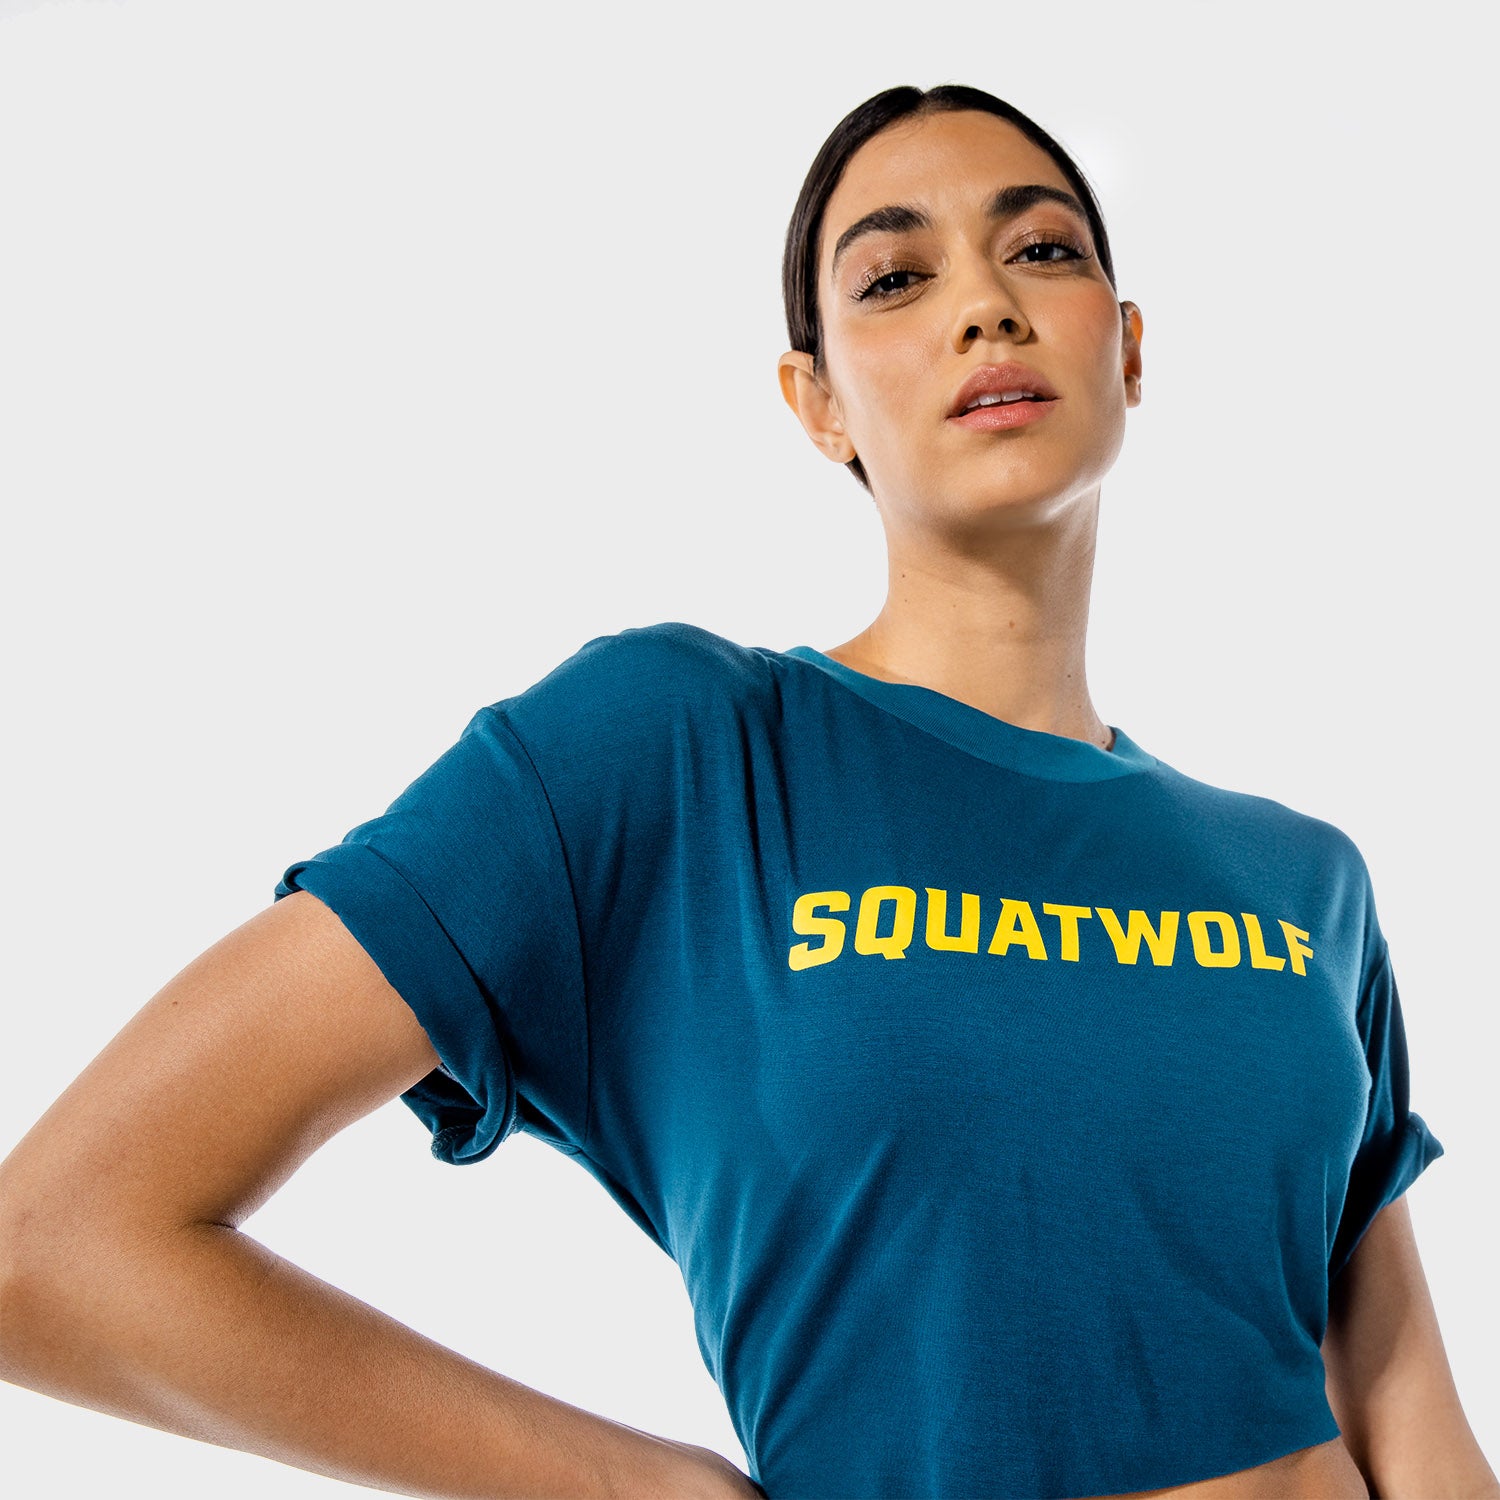 squatwolf-gym-t-shirts-for-women-iconic-crop-tee-teal-workout-clothes